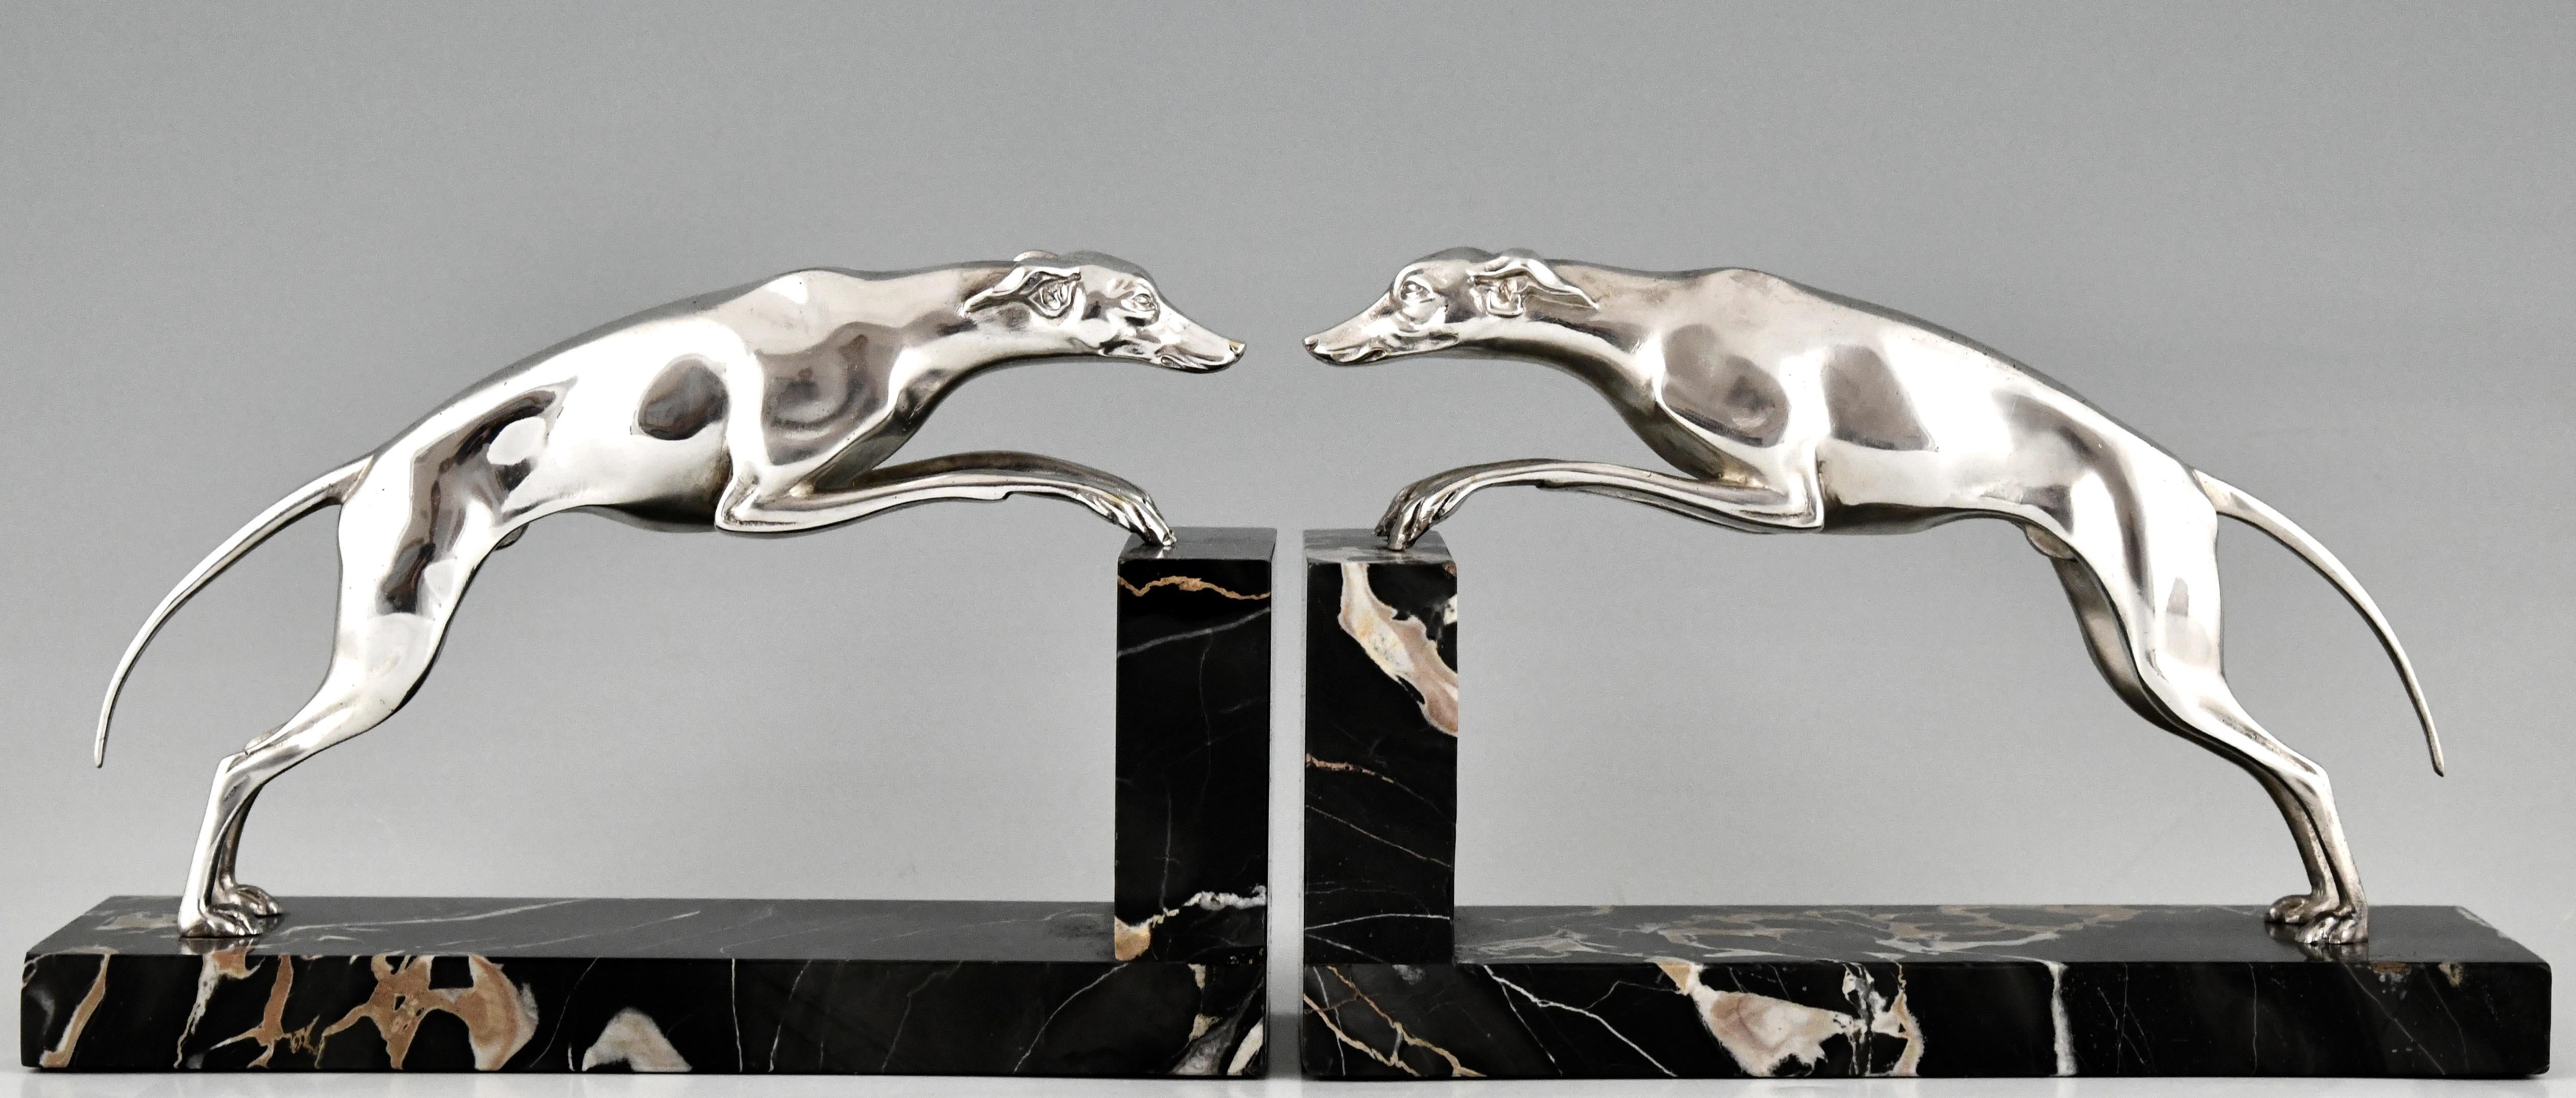 Elegant pair of silvered bronze Art Deco bookends with leaping greyhounds. Signed by Gerorges Gori, France ca. 1930.
The dogs are mounted on Portor marble bases. 
Literature:
Benezit. ?Statuettes of the Art Deco period.